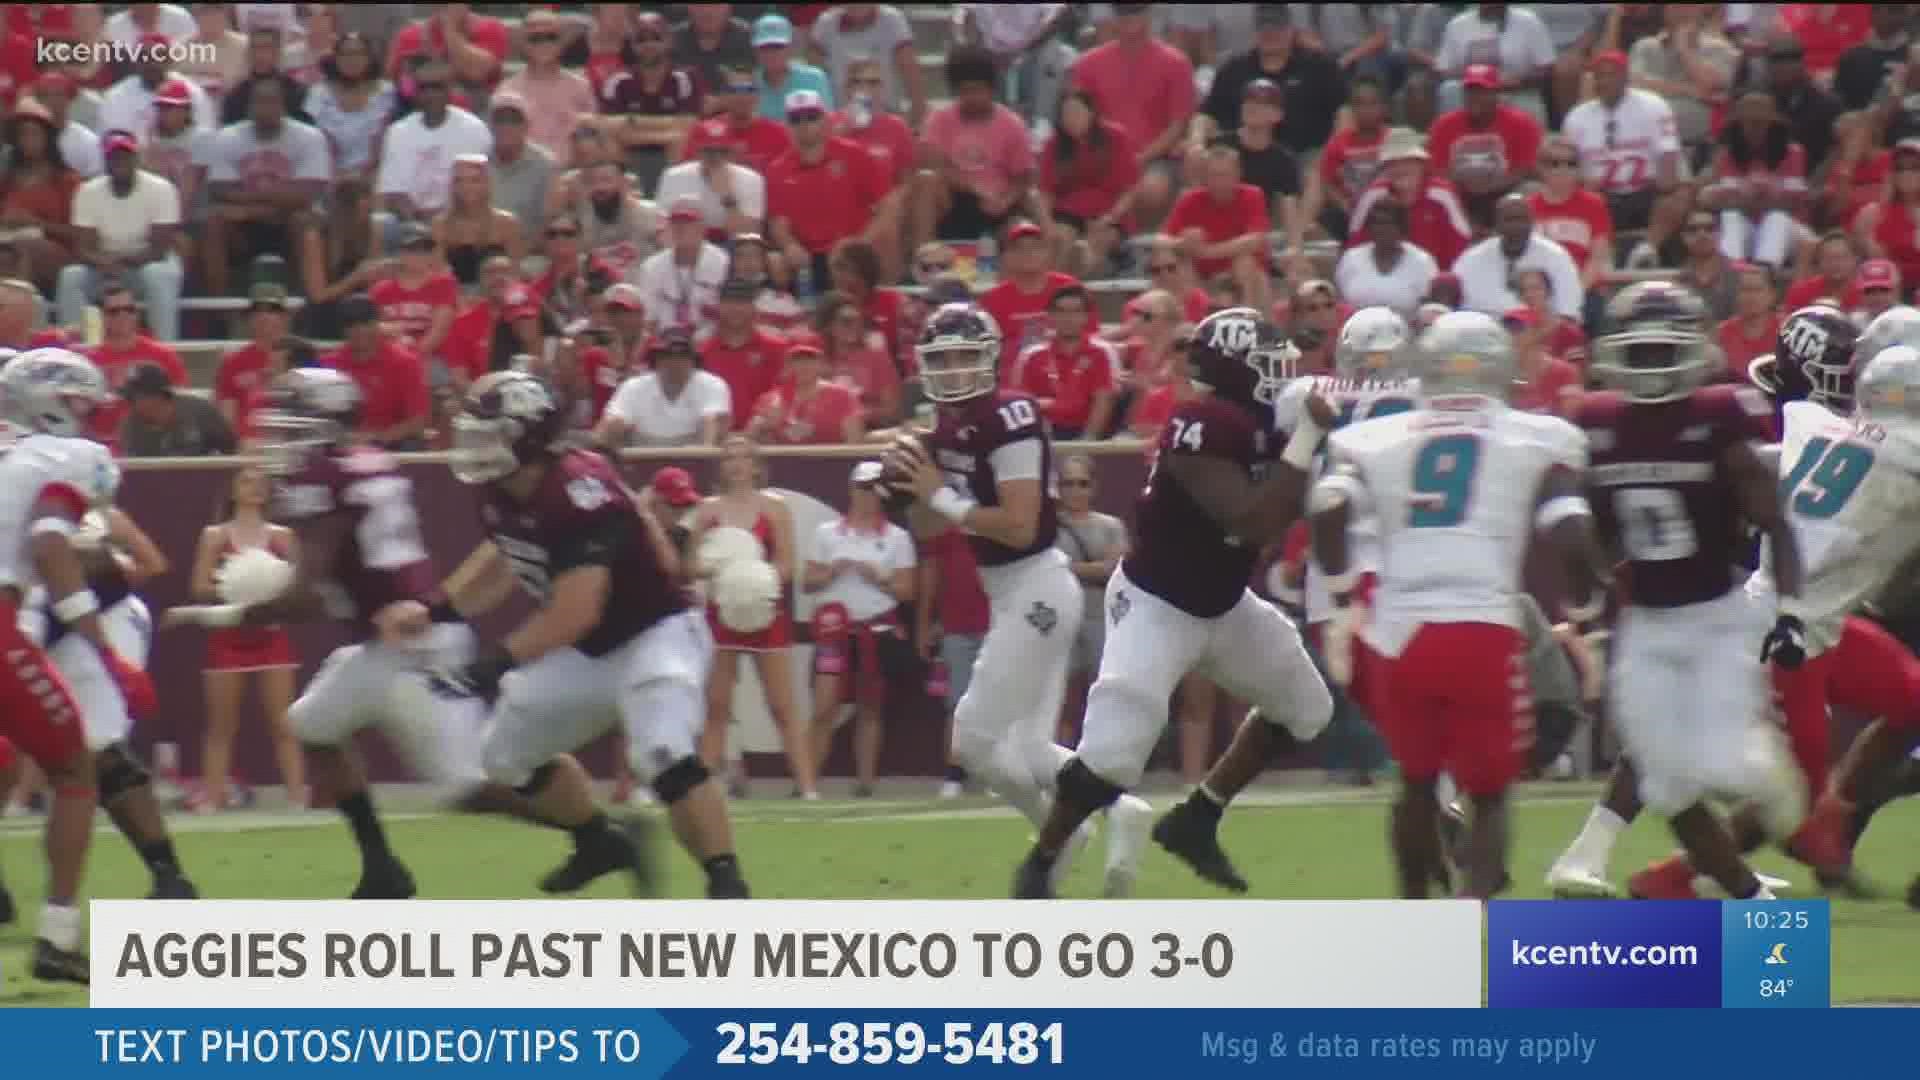 Highlights of Texas A&M's Saturday victory over New Mexico